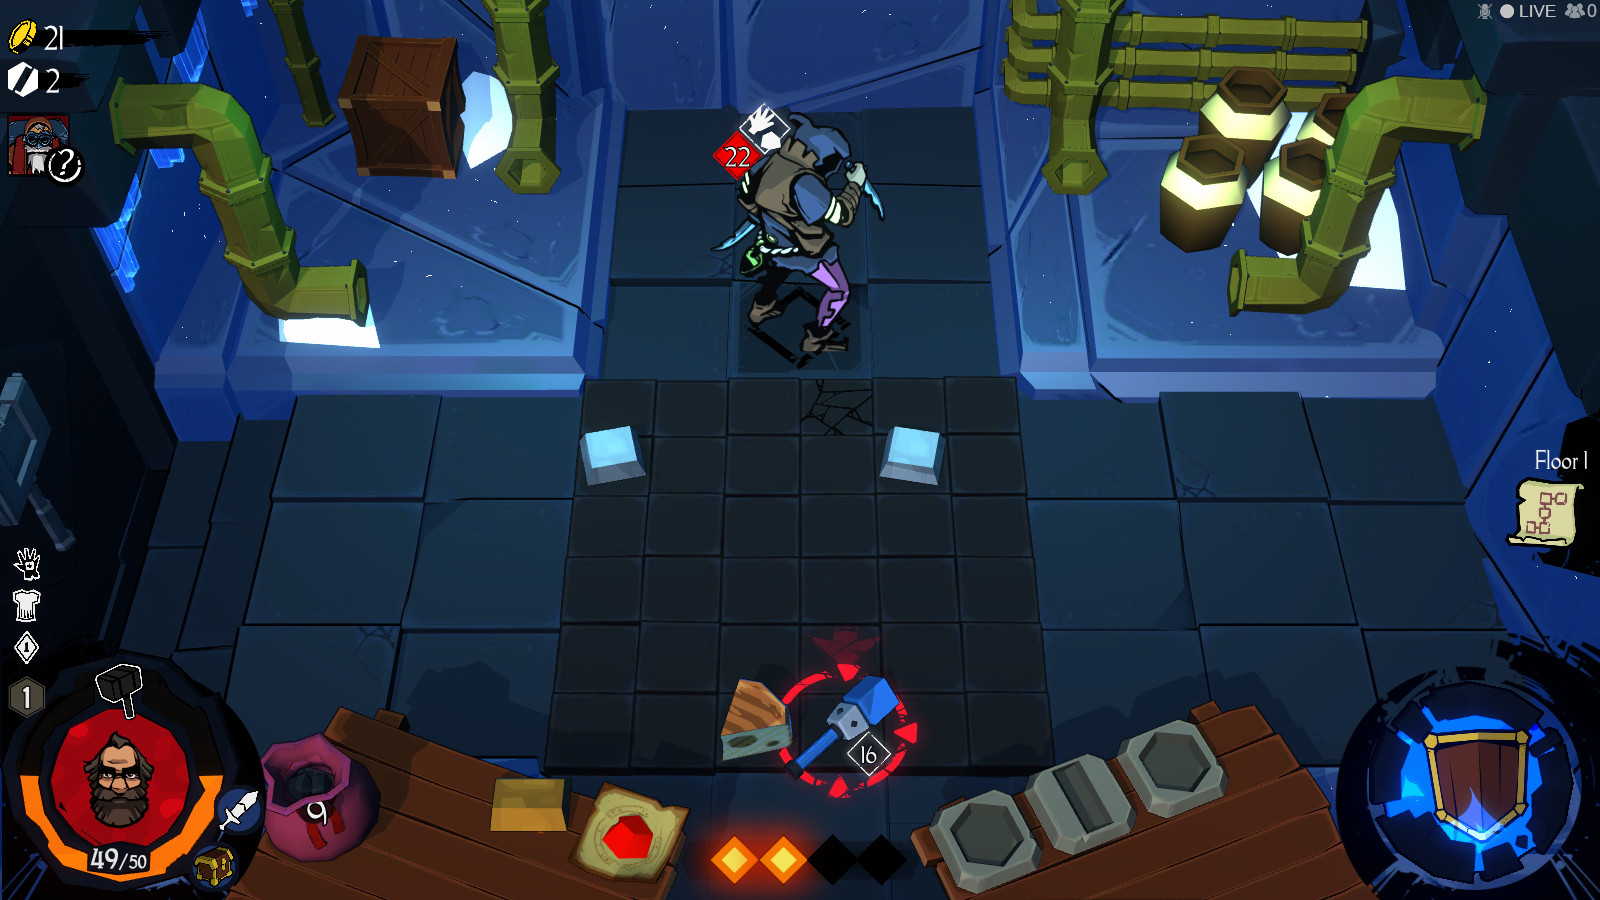 Puzzle Forge Dungeon Free Download